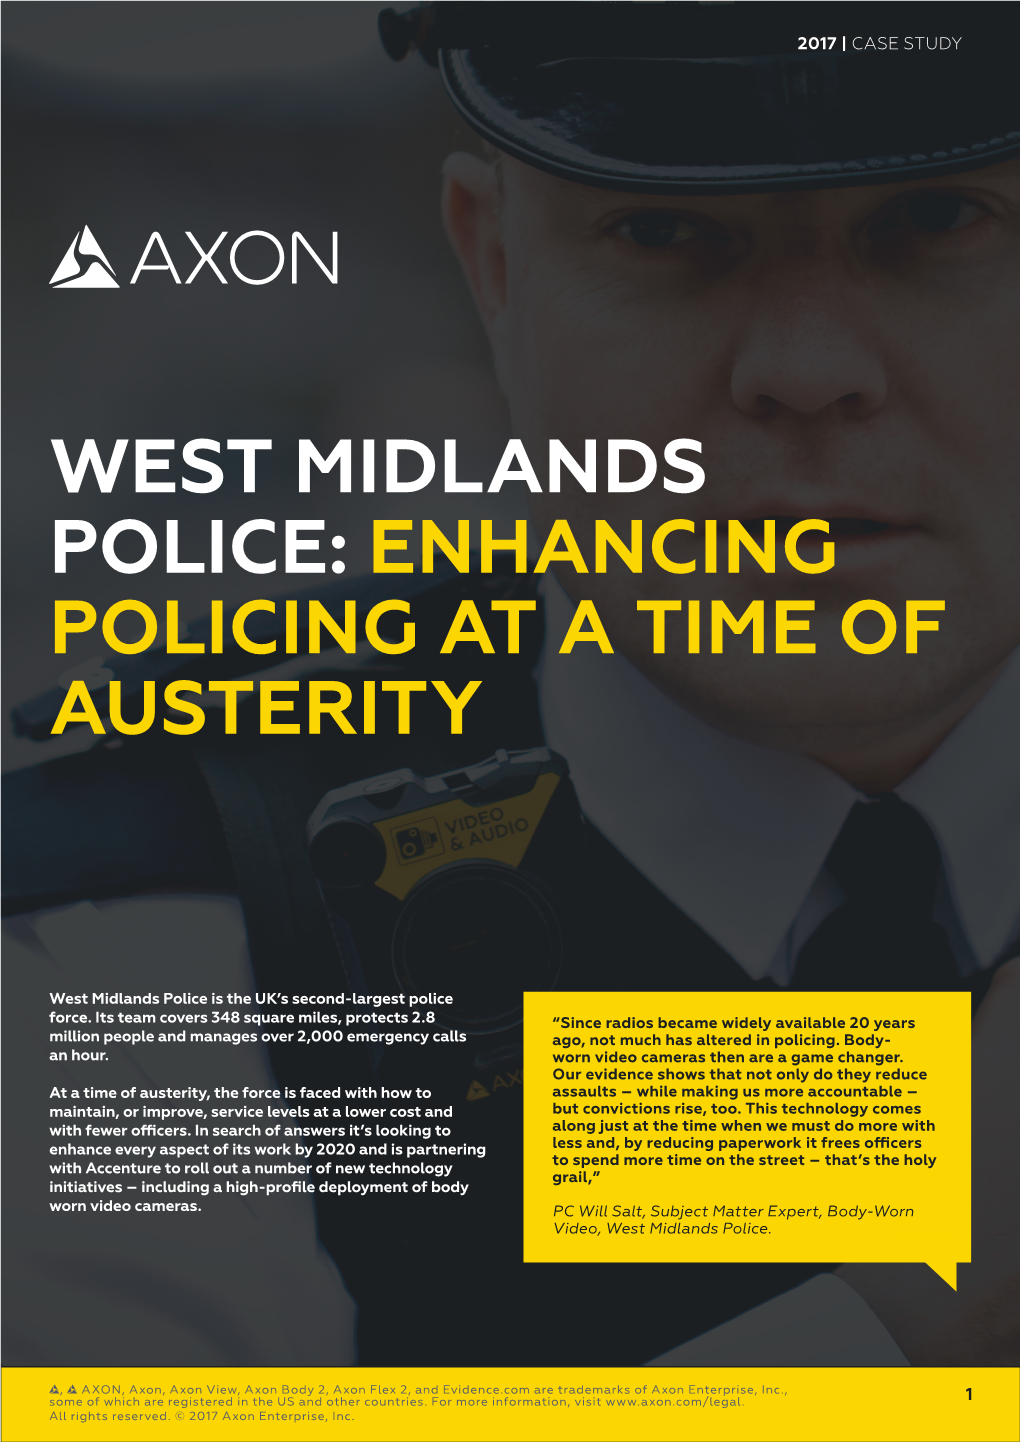 West Midlands Police: Enhancing Policing at a Time of Austerity